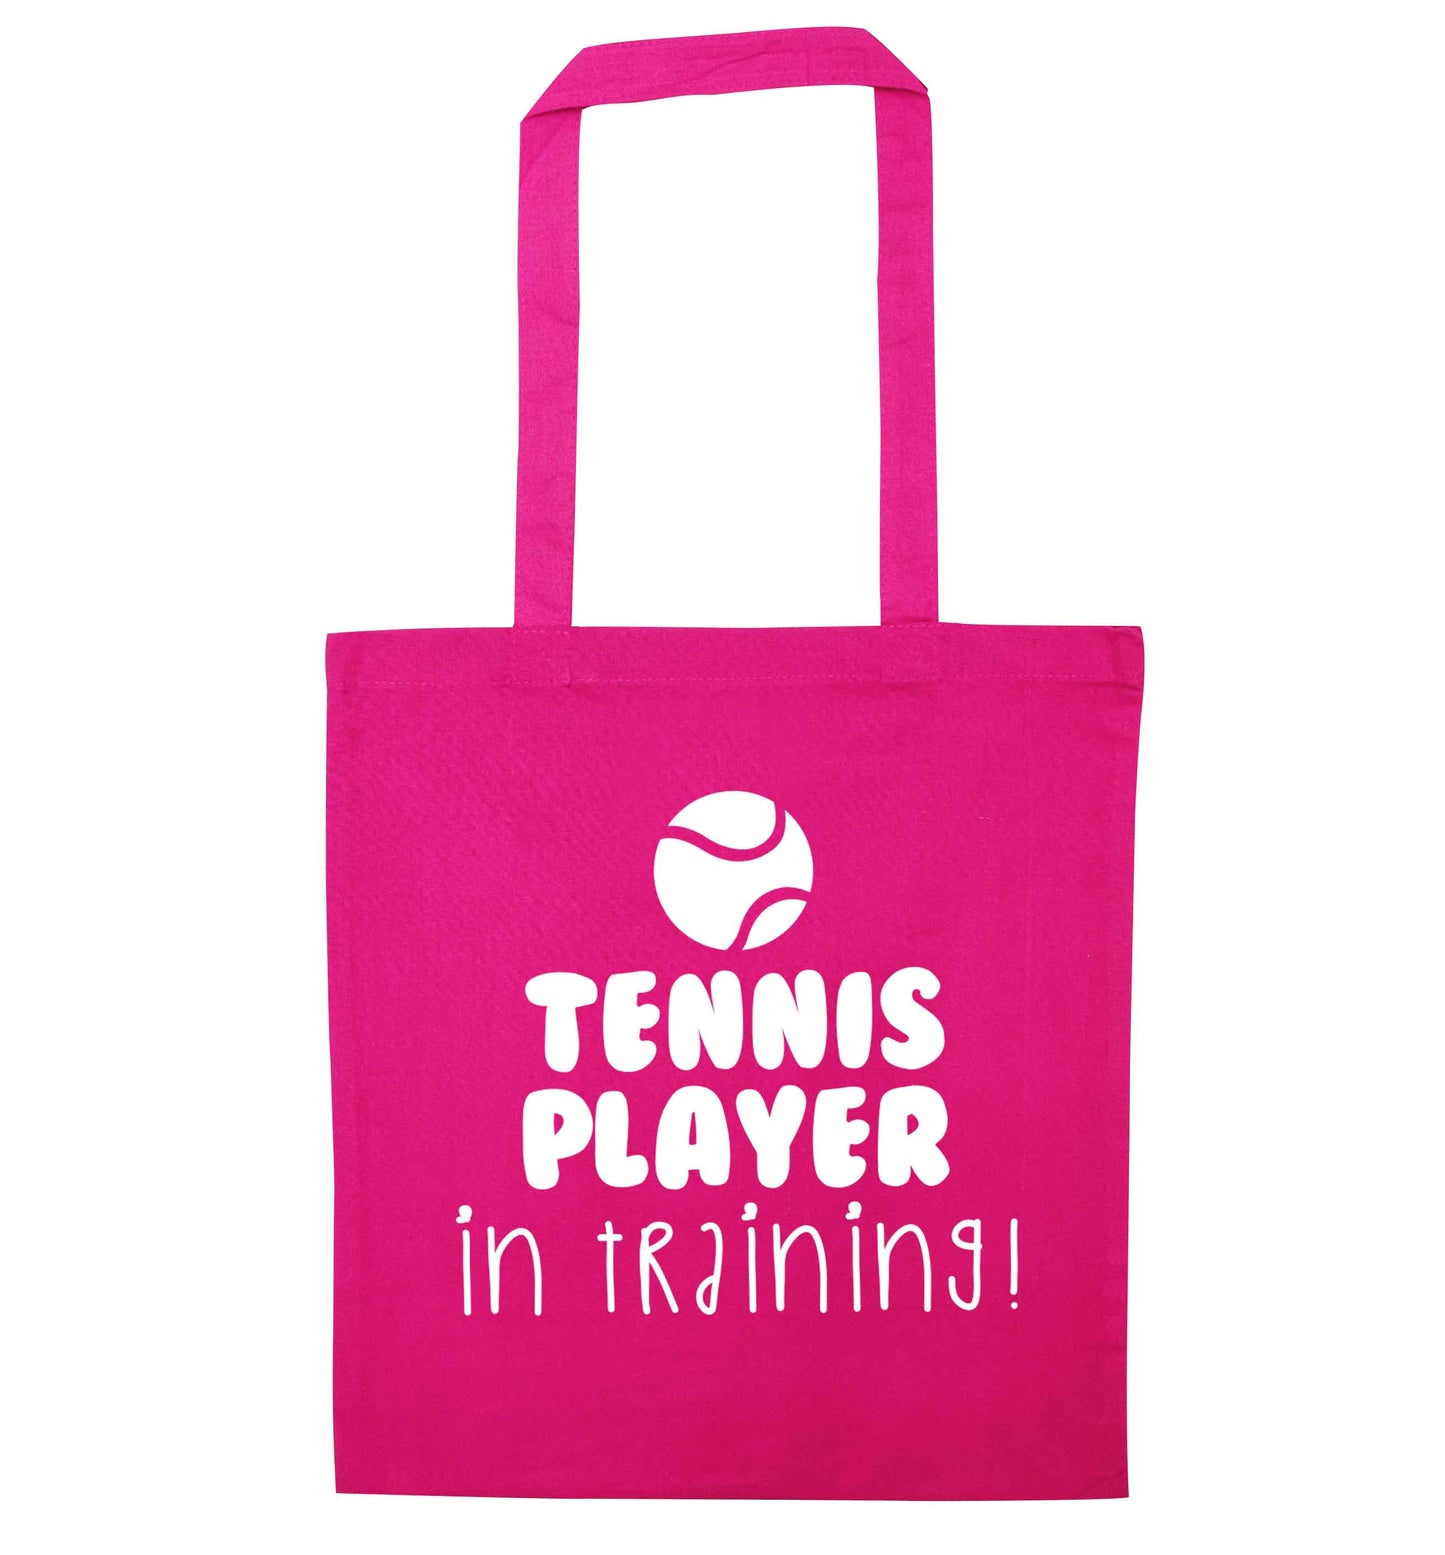 Tennis player in training pink tote bag